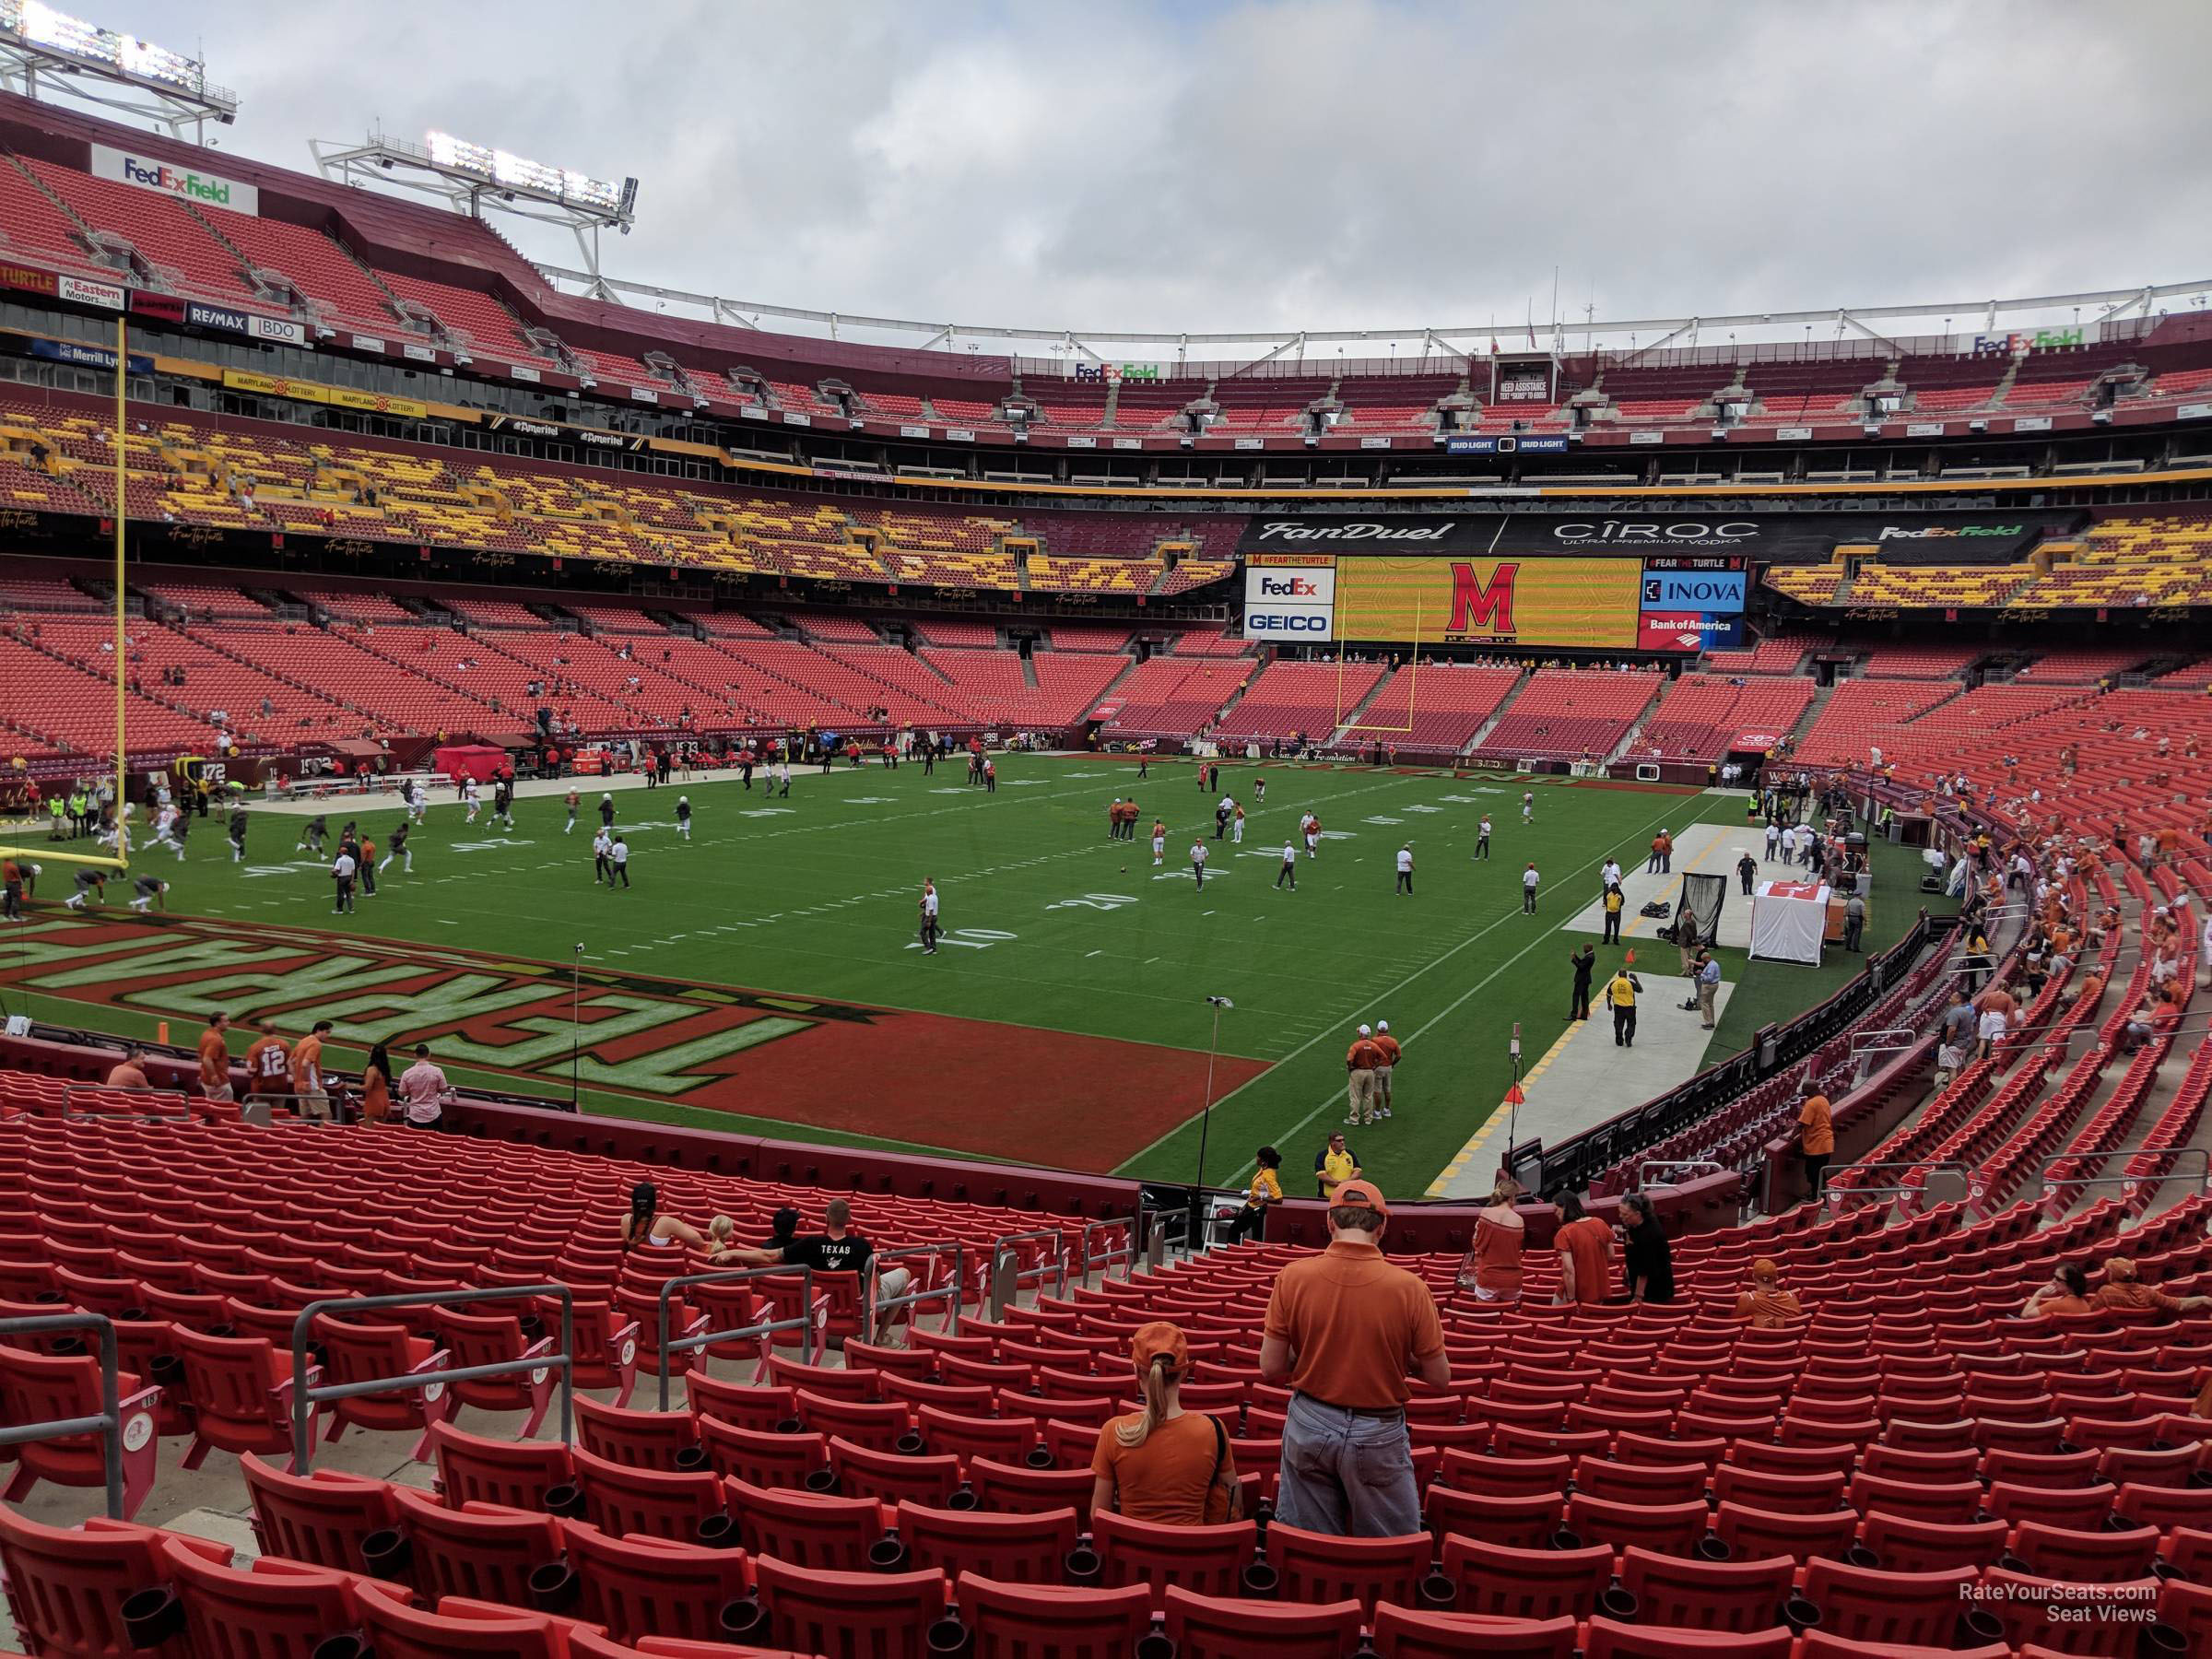 section 129, row 25 seat view  - fedexfield